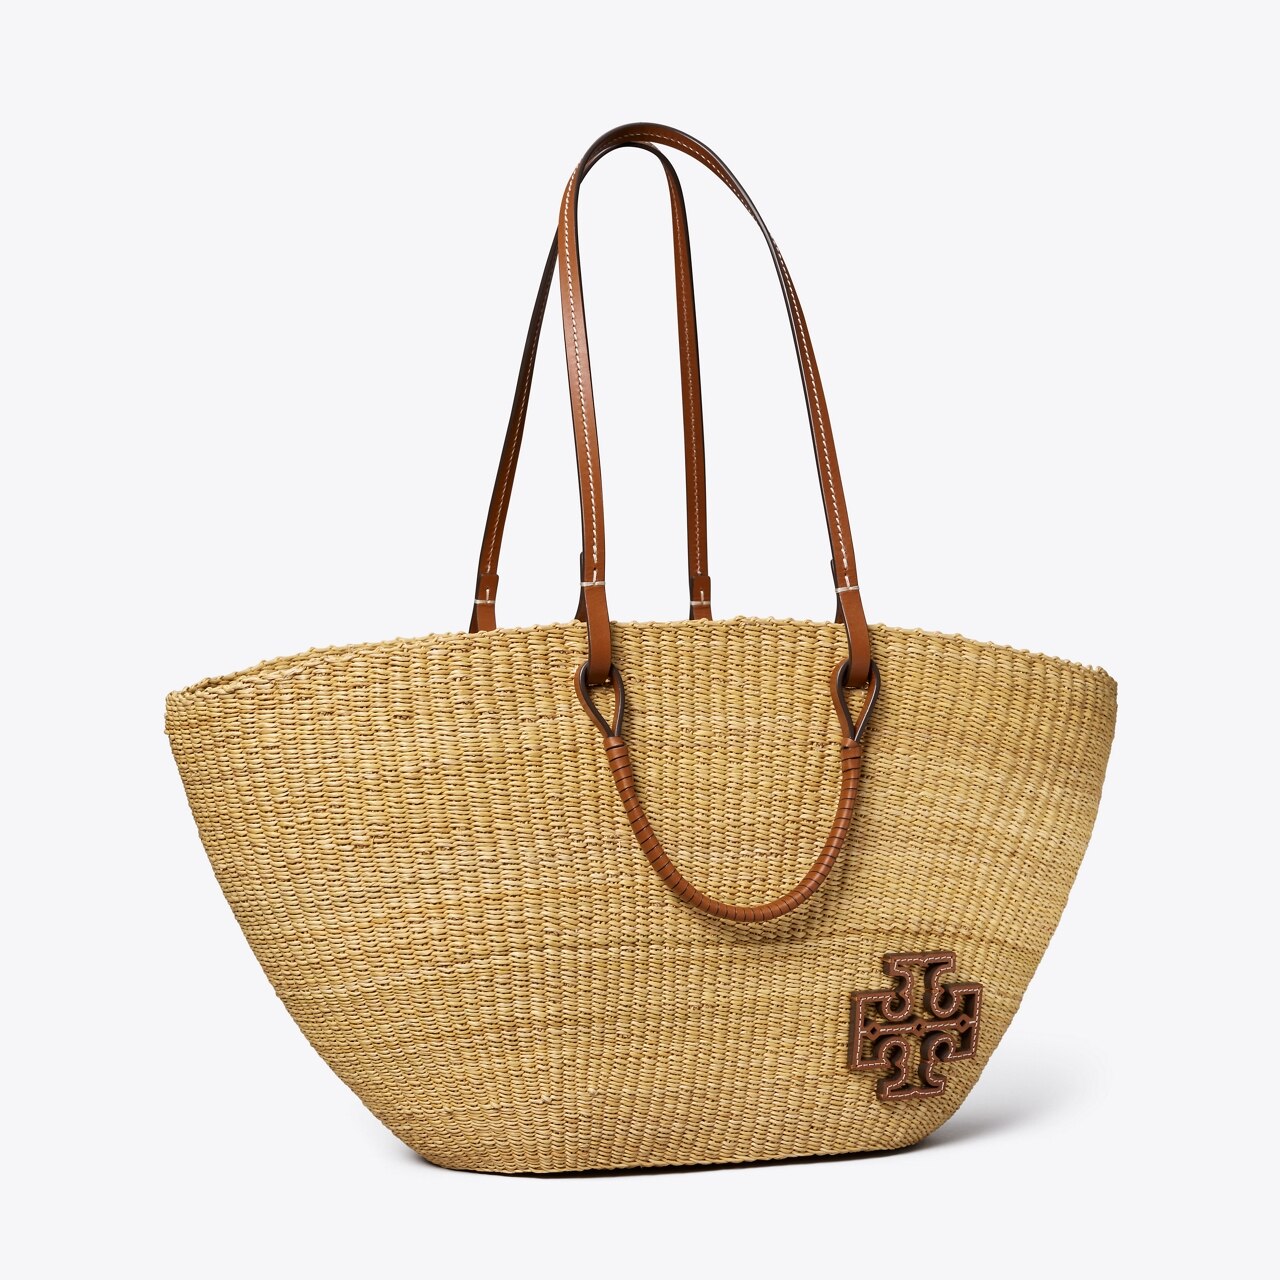 Tory Burch Mcgraw Straw Tote in Natural